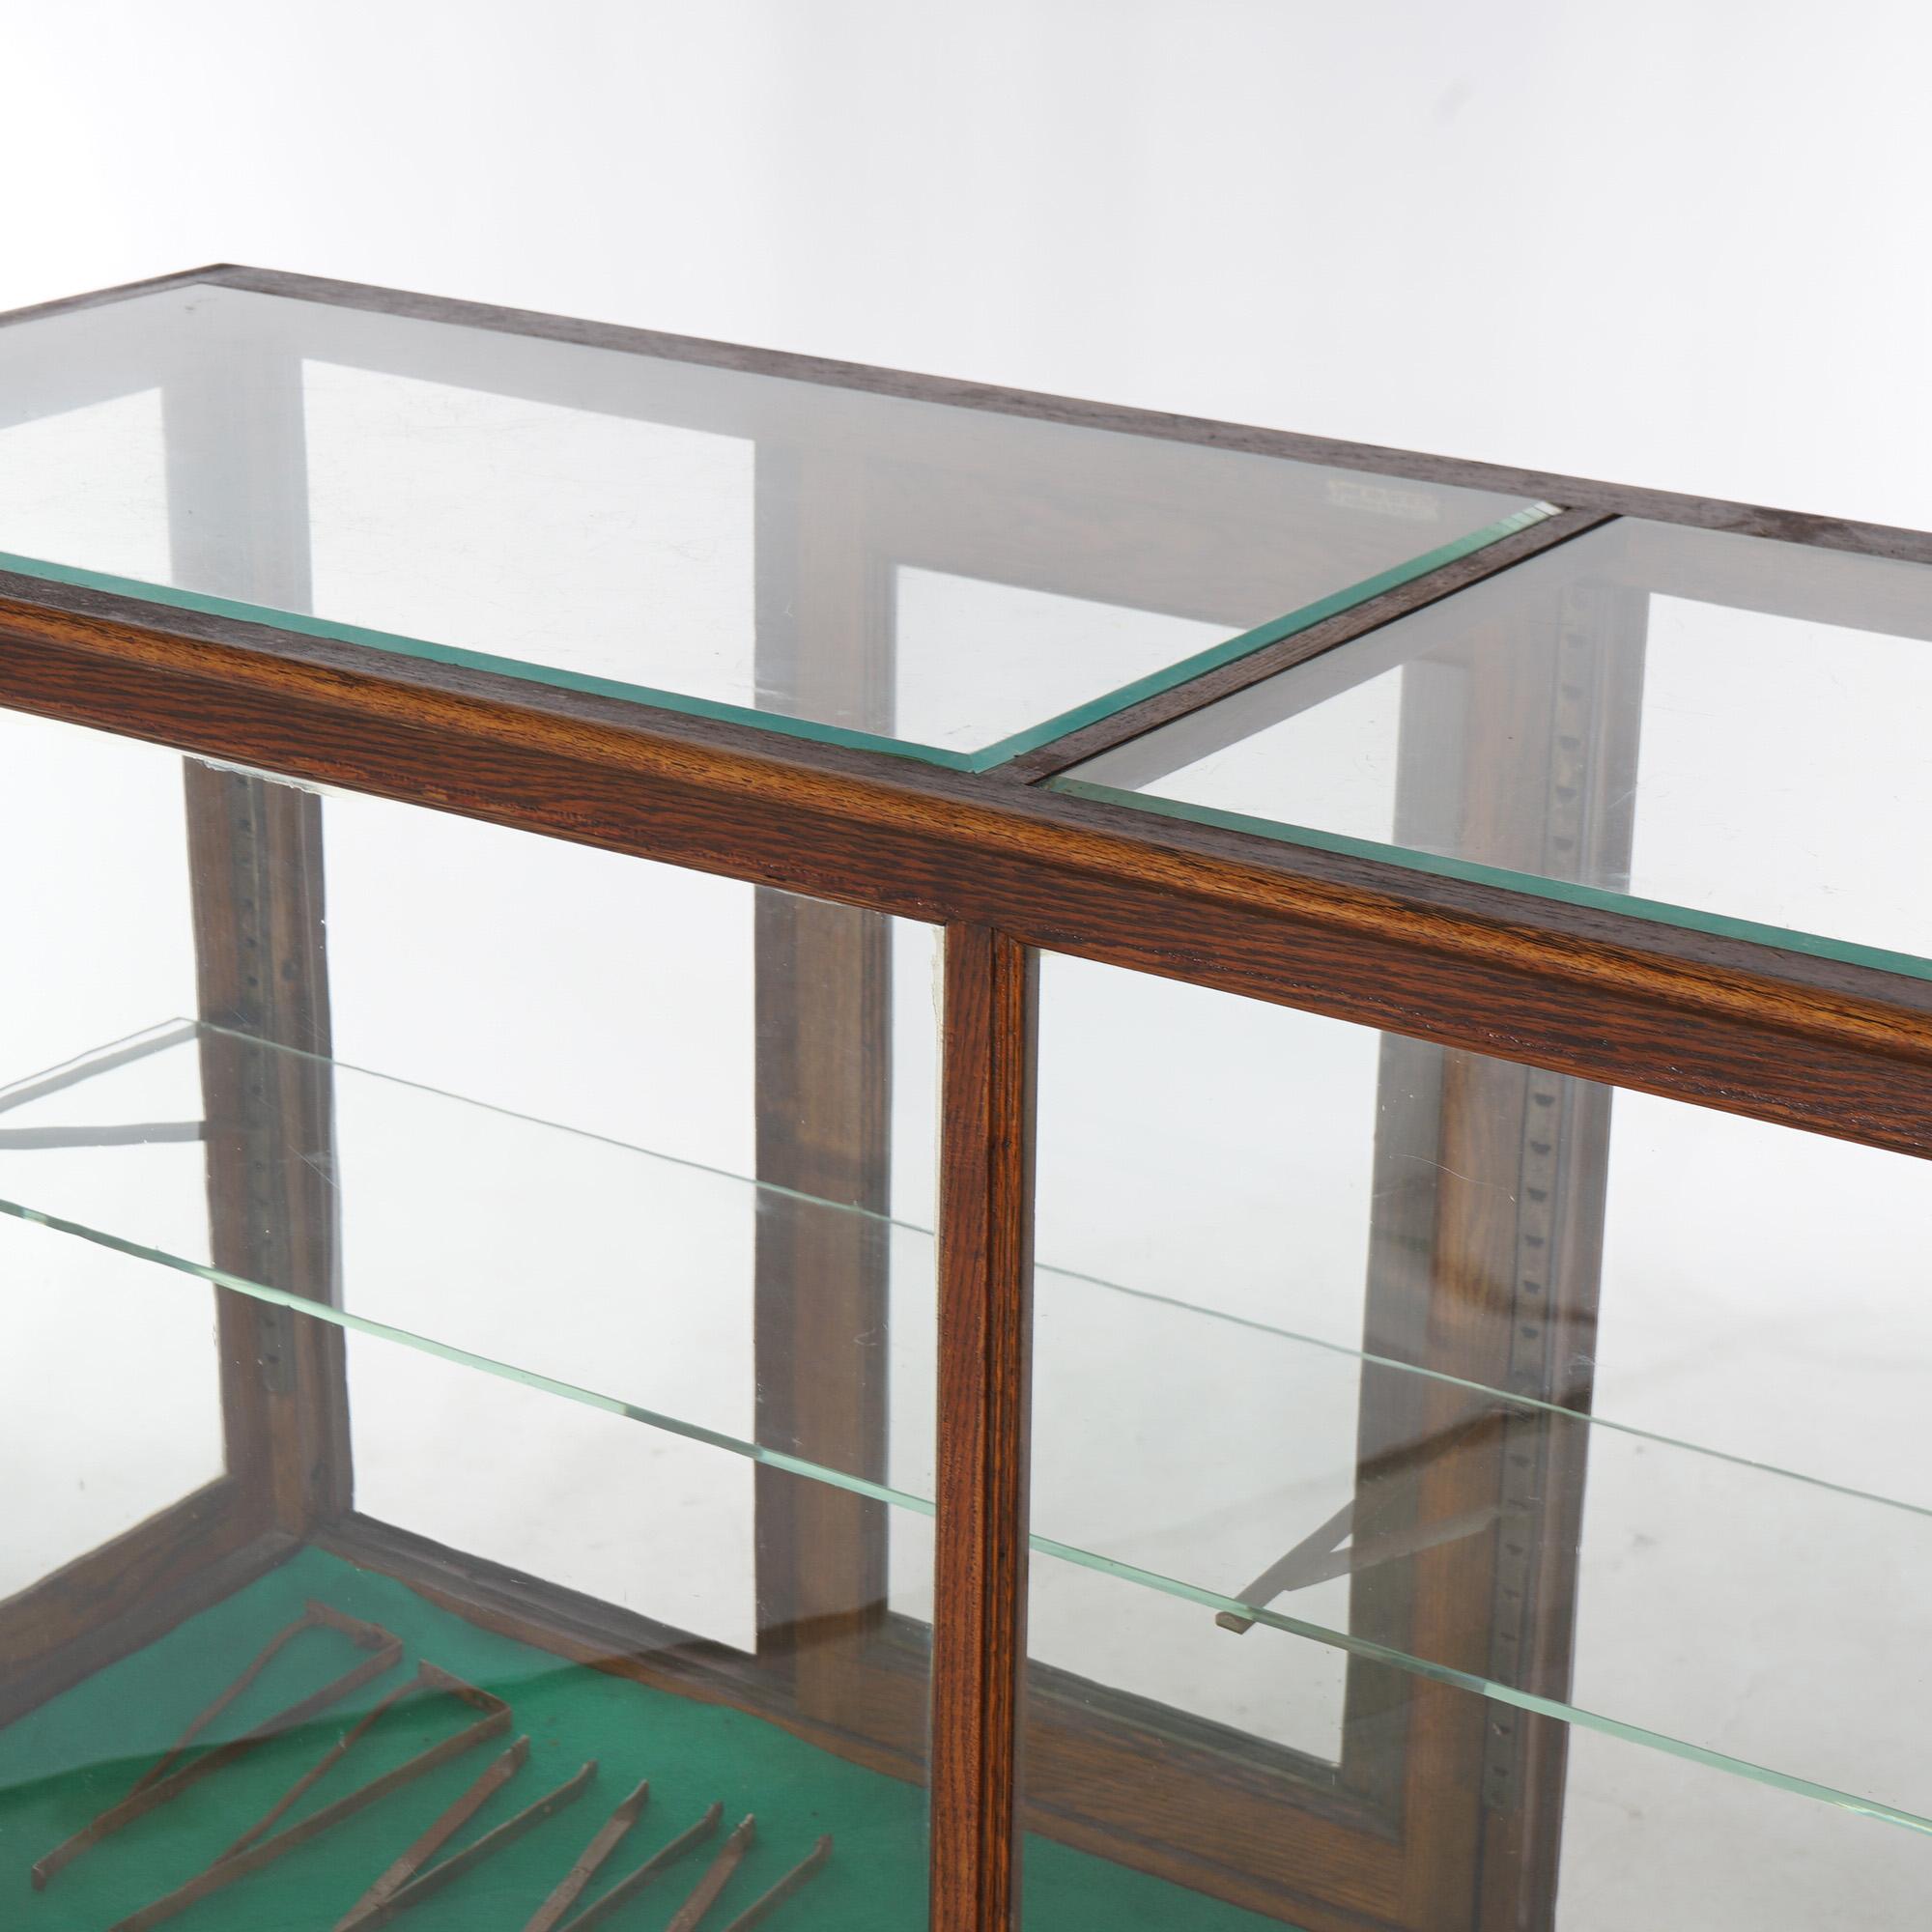 American Antique Oak Country Store Display Case, Floor Model, Signed Saginaw, c1920 For Sale